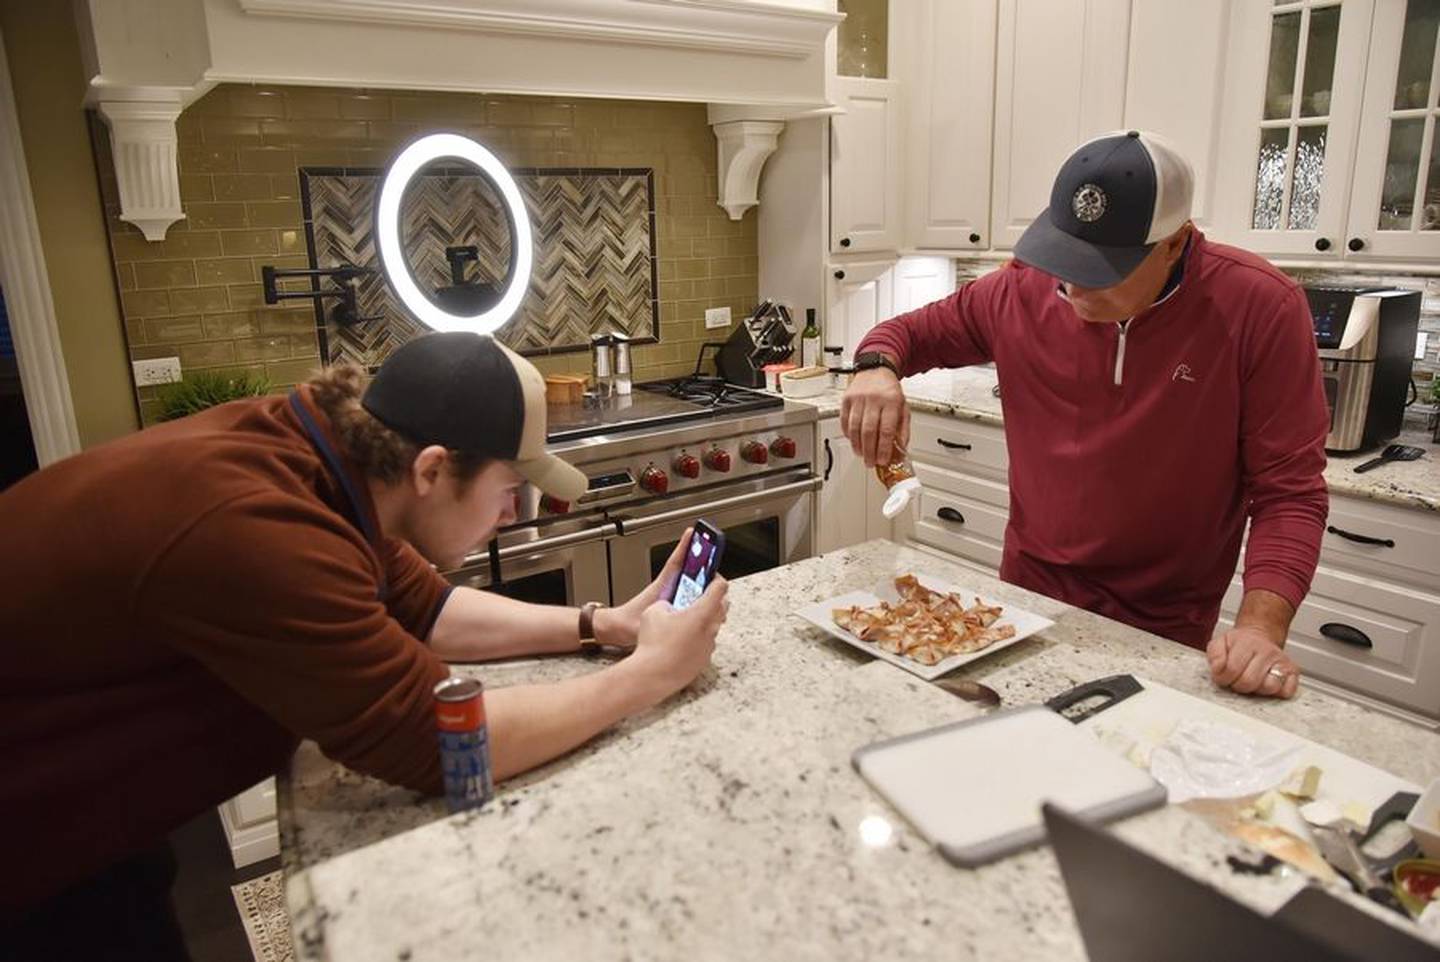 Intern Jake Konieczka, a North Central College student in Naperville, records Darryl Postelnick as he makes a social media cooking video in his Algonquin kitchen.